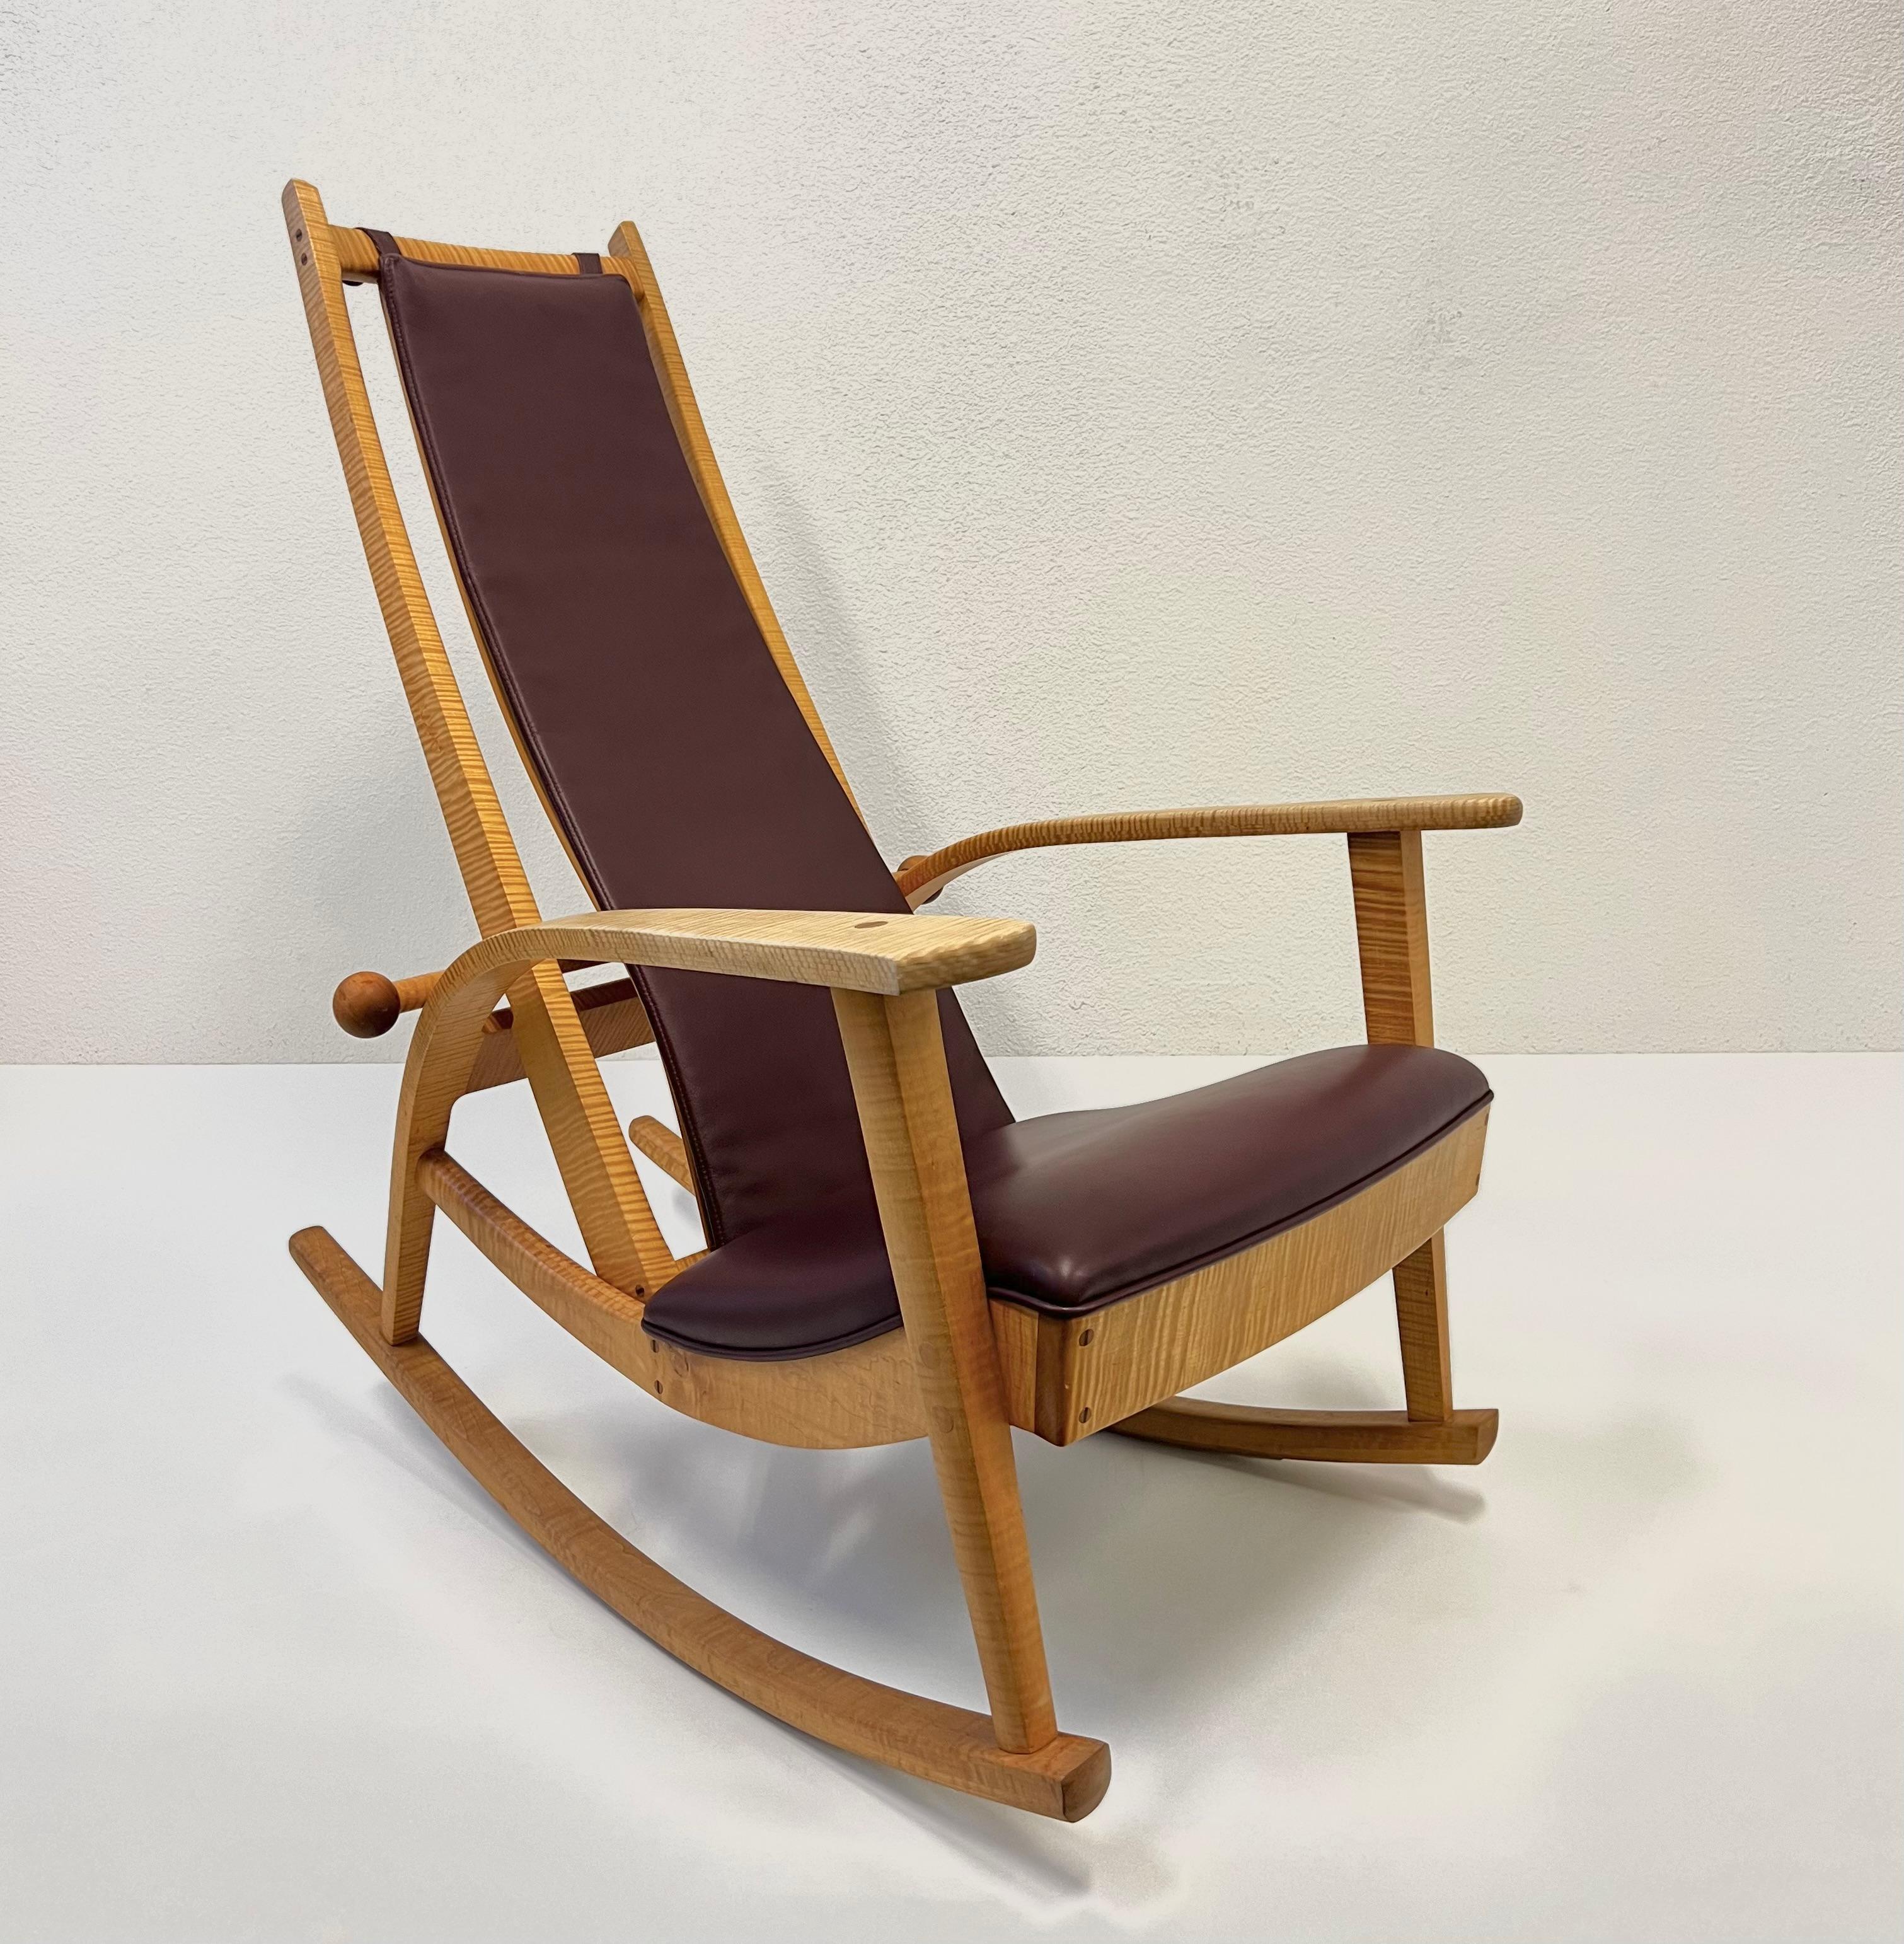 Hand-Crafted Studio Hand Crafted Rocking Chair by Robert Erickson 